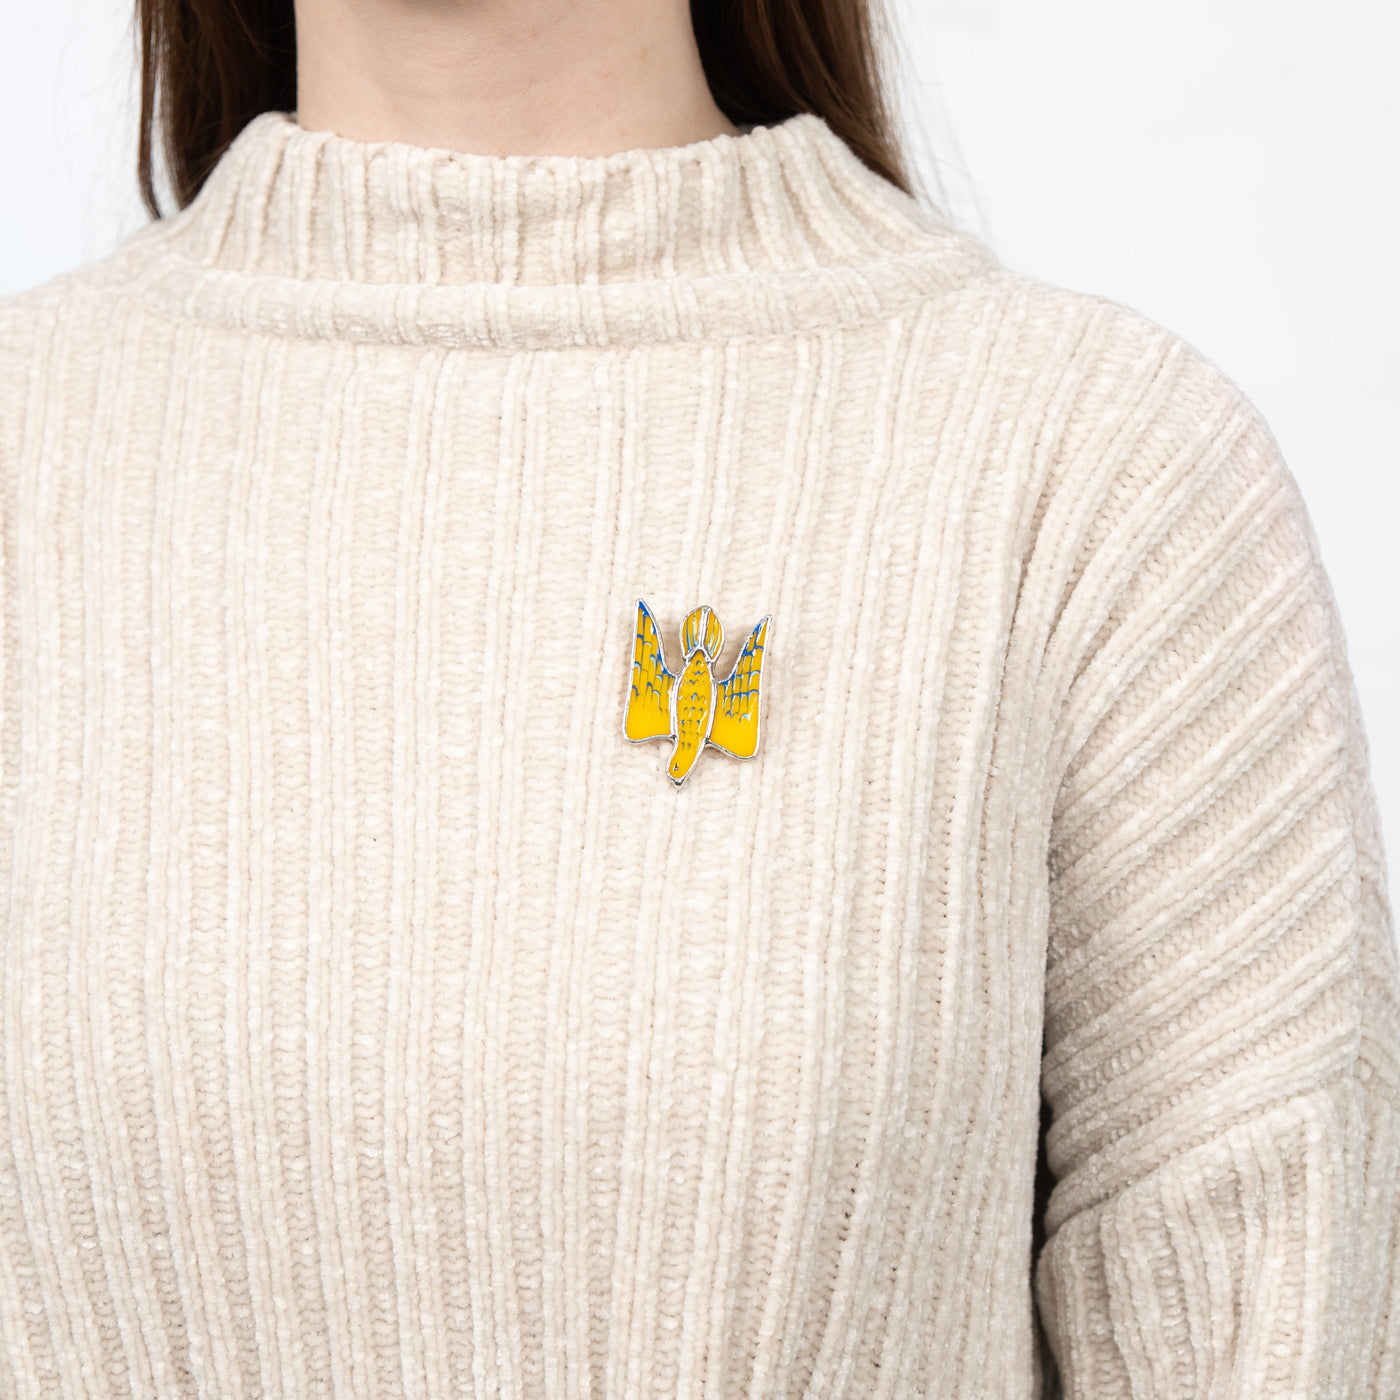 Stained glass falcon brooch on a sweater